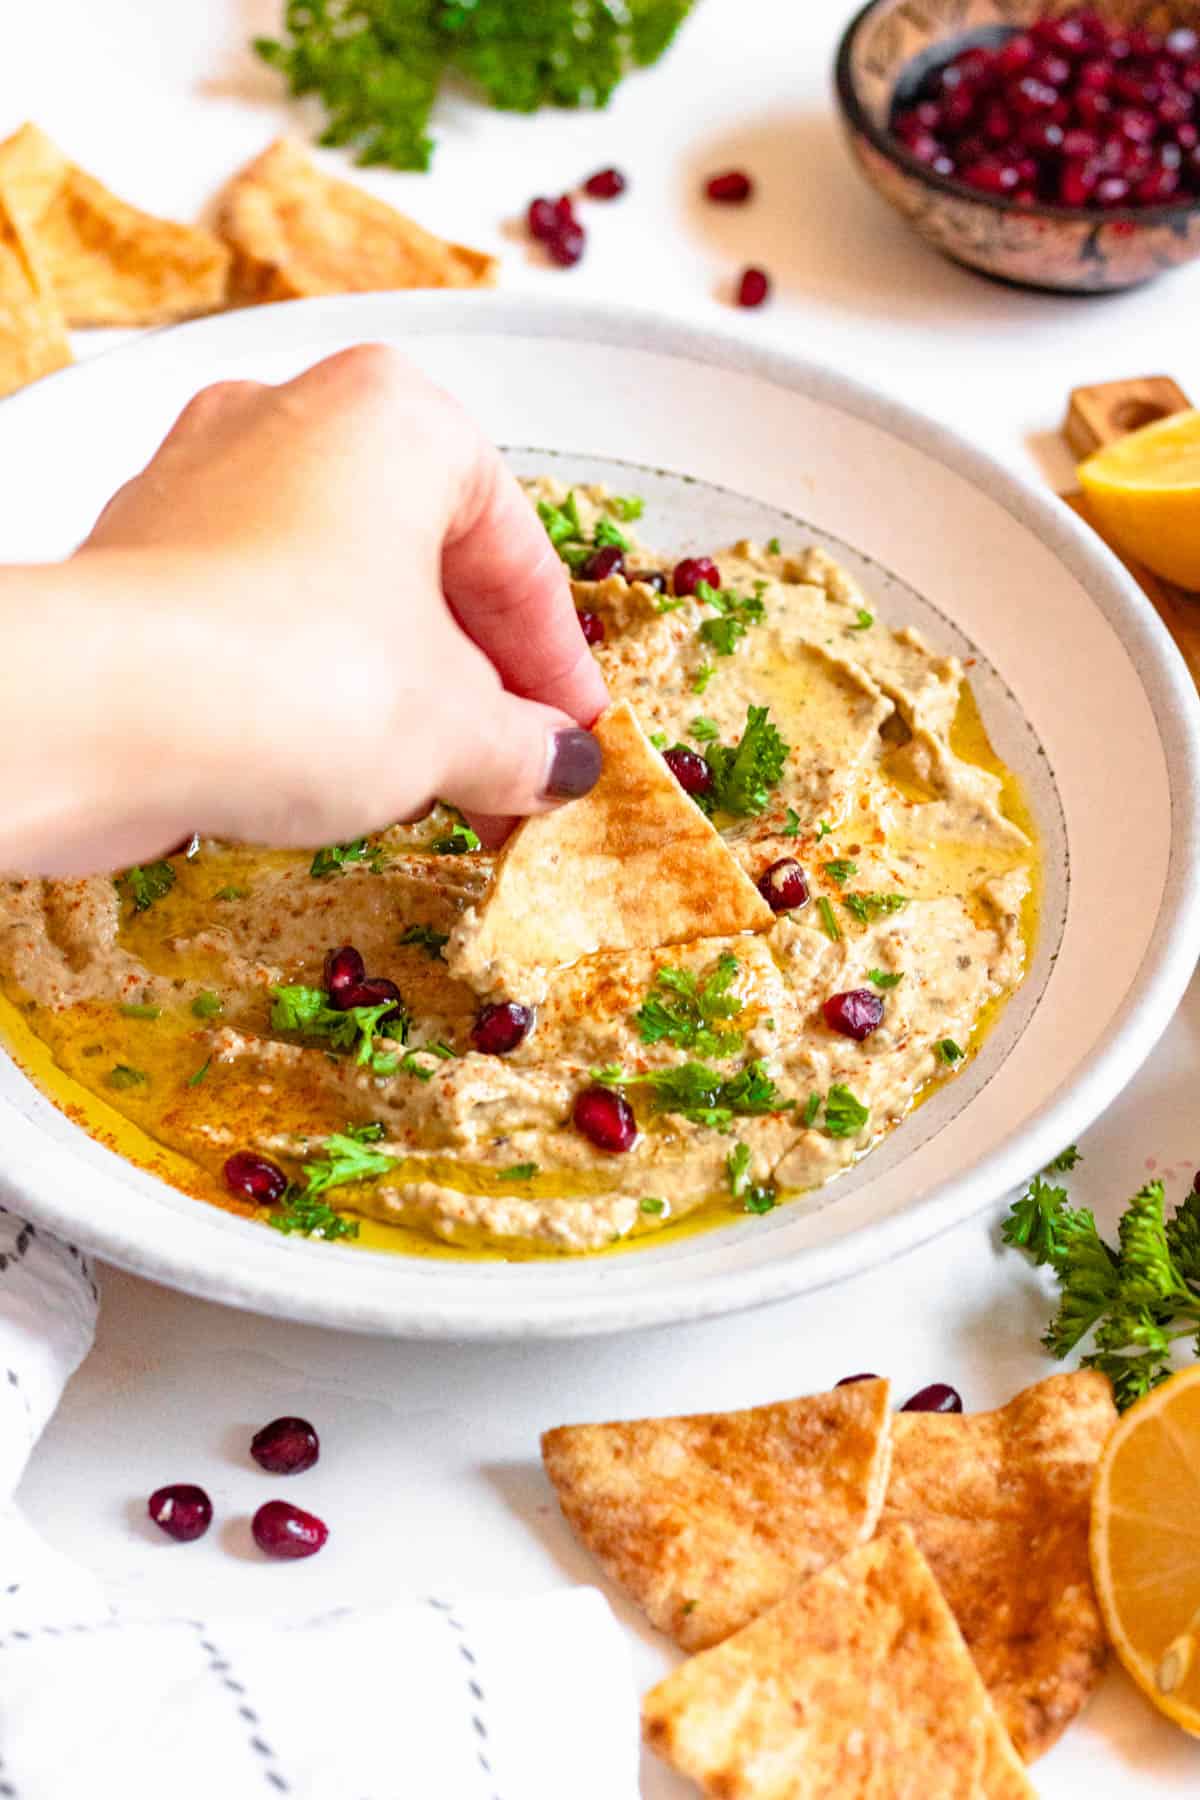 Hand dipping a pita chip in a shallow bowl of baba ganoush.